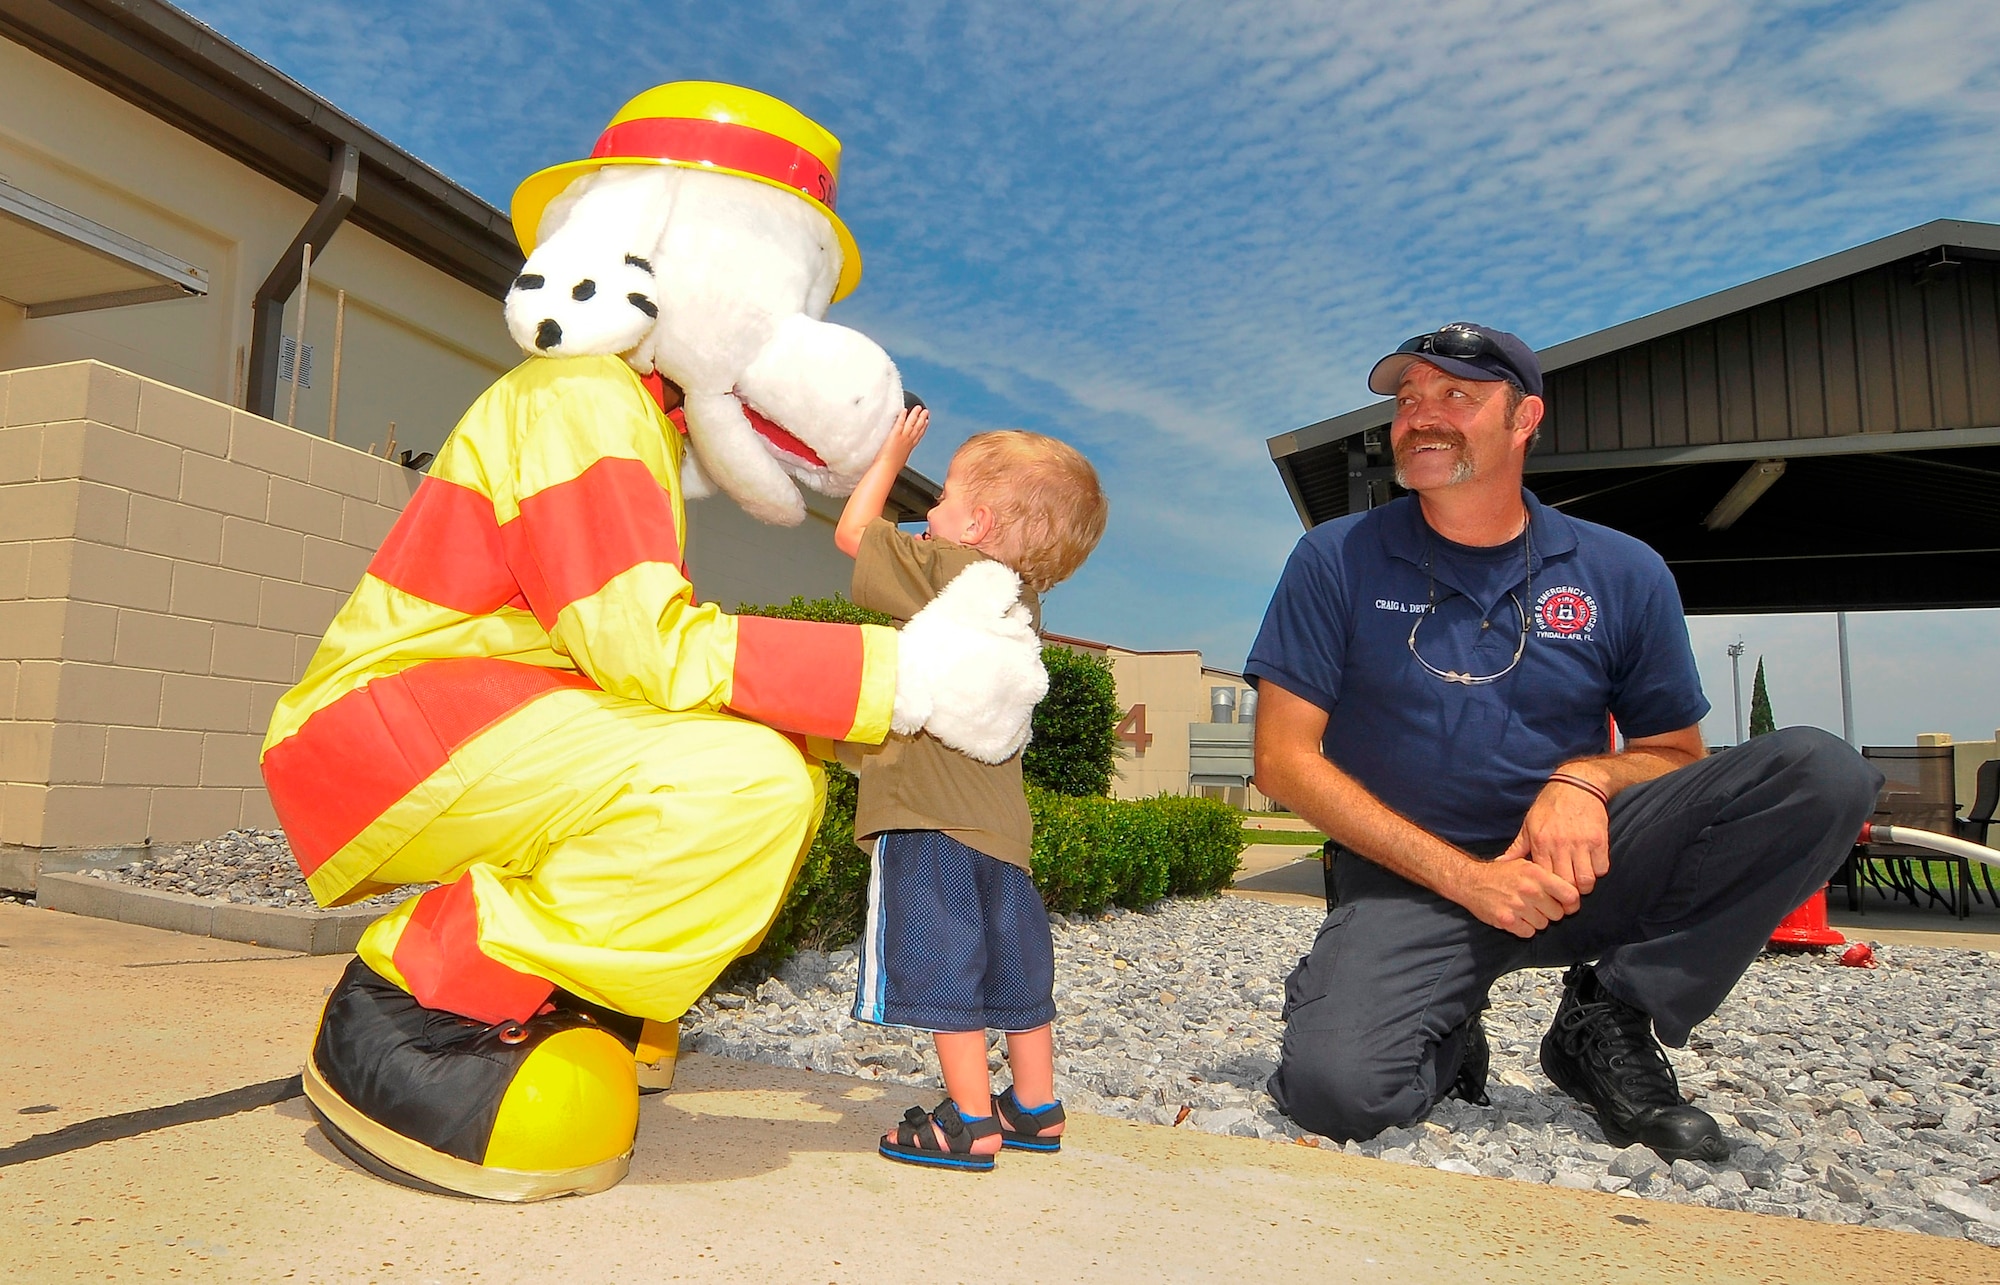 Craig Devoy, 325th Civil Engineer Squadron firefighter, introduces Jaxson to Sparky the fire dog during his visit to the fire department while on his tour of Tyndall. Jaxson was born with Russell-Silver syndrome, a genetic growth disorder characterized by slow growth before and after birth. (U.S. Air Force photo by Chris Cokeing)